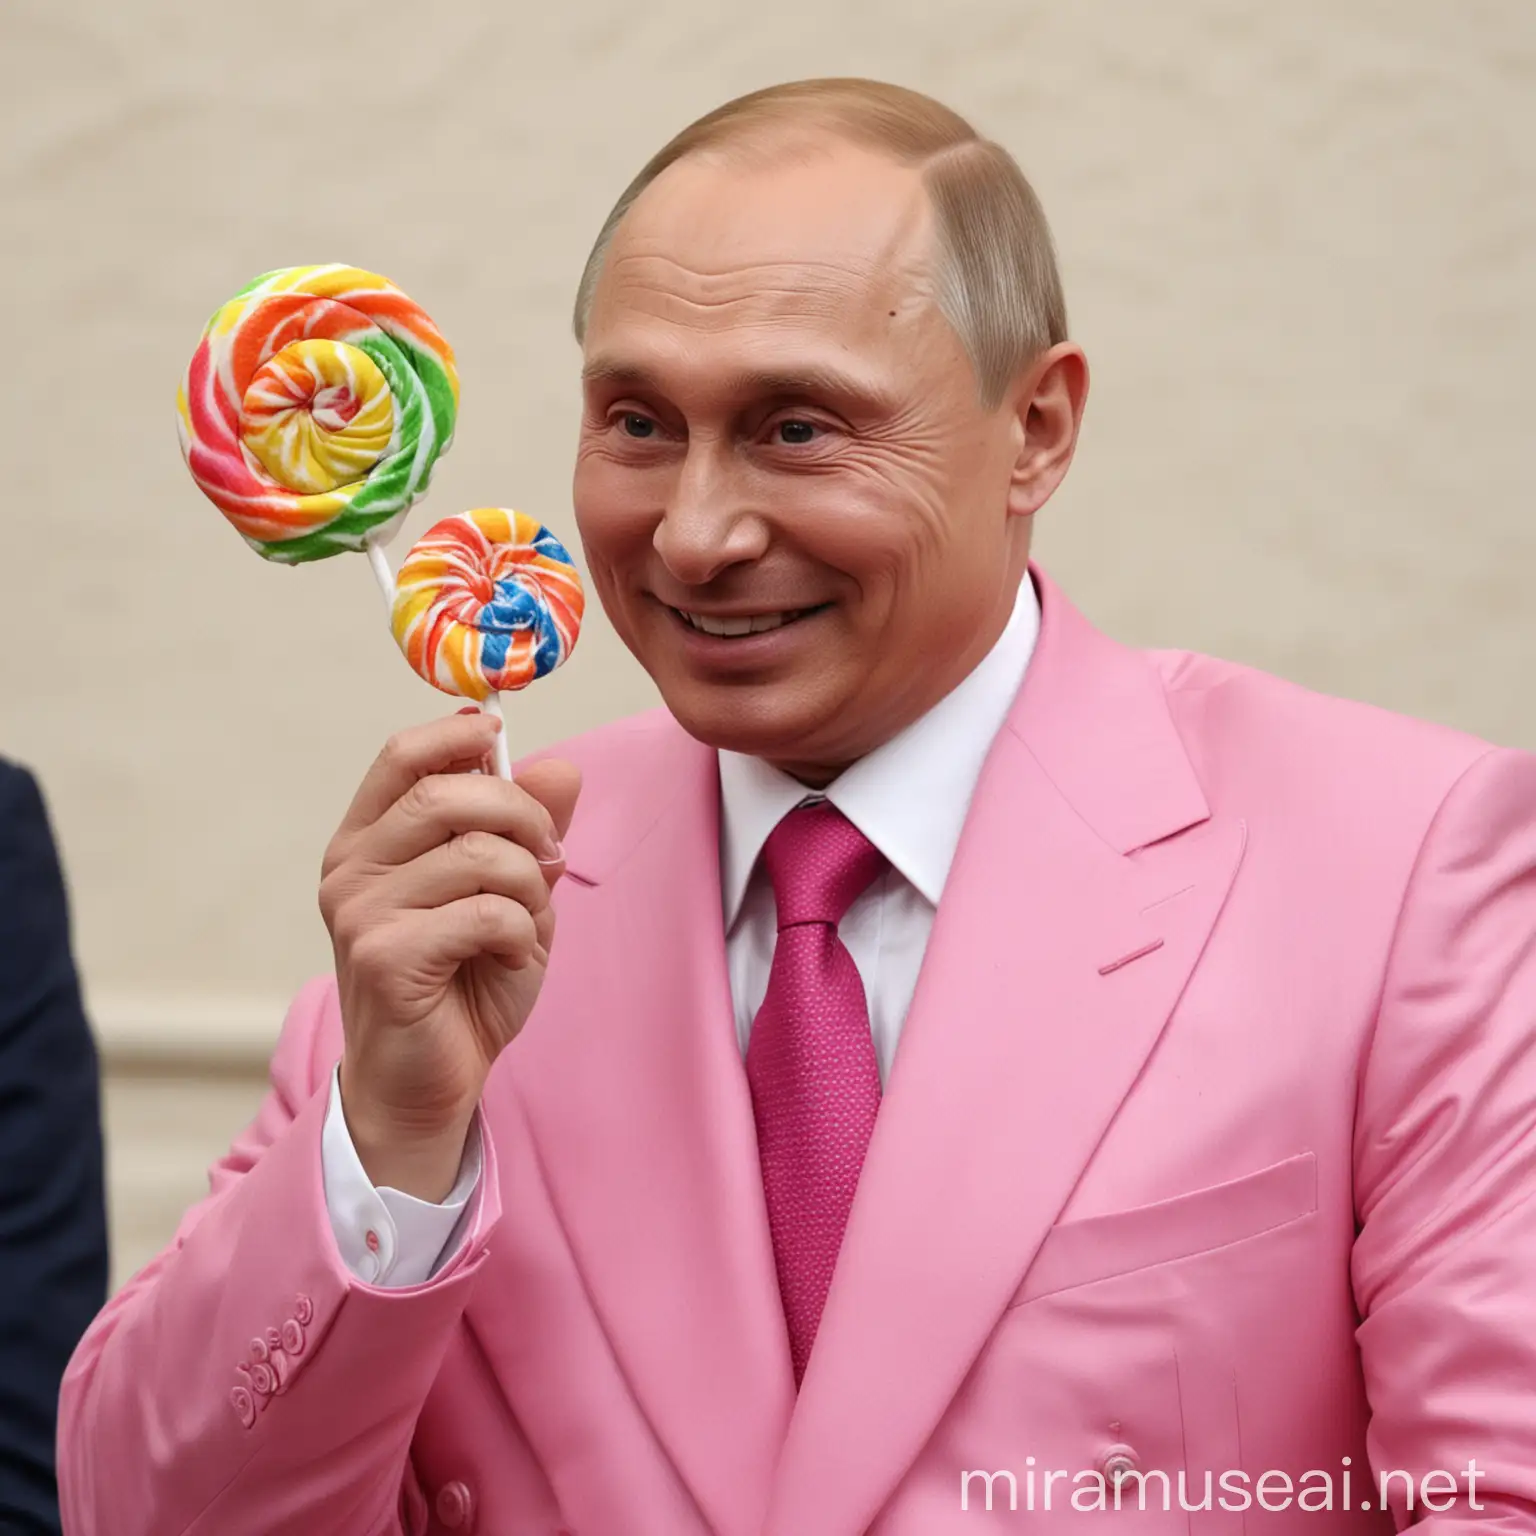 Vladimir Putin wearing a pink suit ,has rainbow pigtails ,smiling sucking on a lolly pop